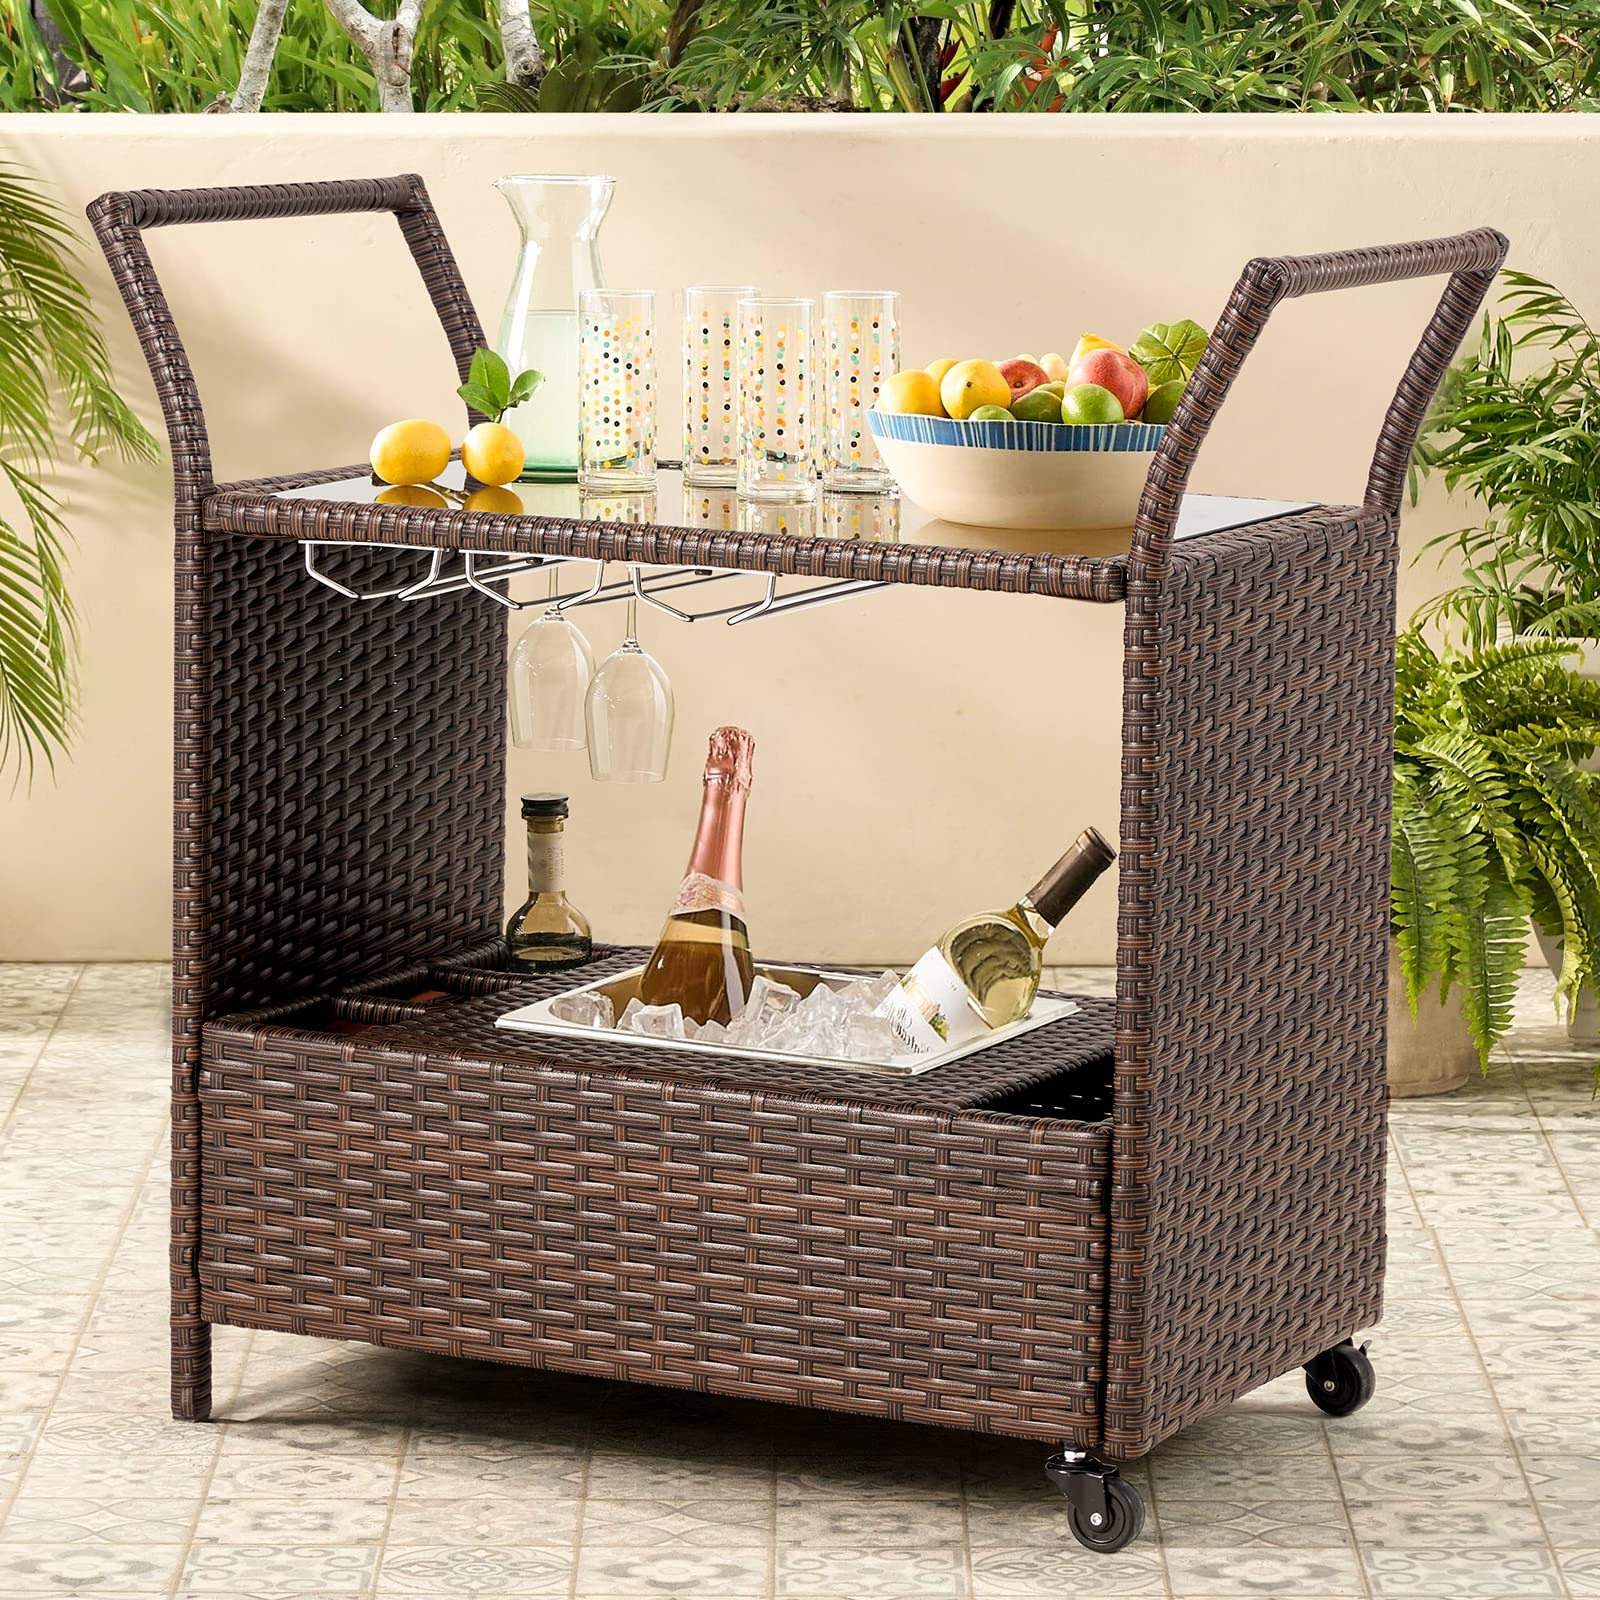 homrest-outdoor-wicker-bar-cart-with-removable-ice-bucket-rattan-bar-serving-cart-with-glass-holder-and-wheels-beverage-cart-with-glass-countertop-for-pool-party-backyard